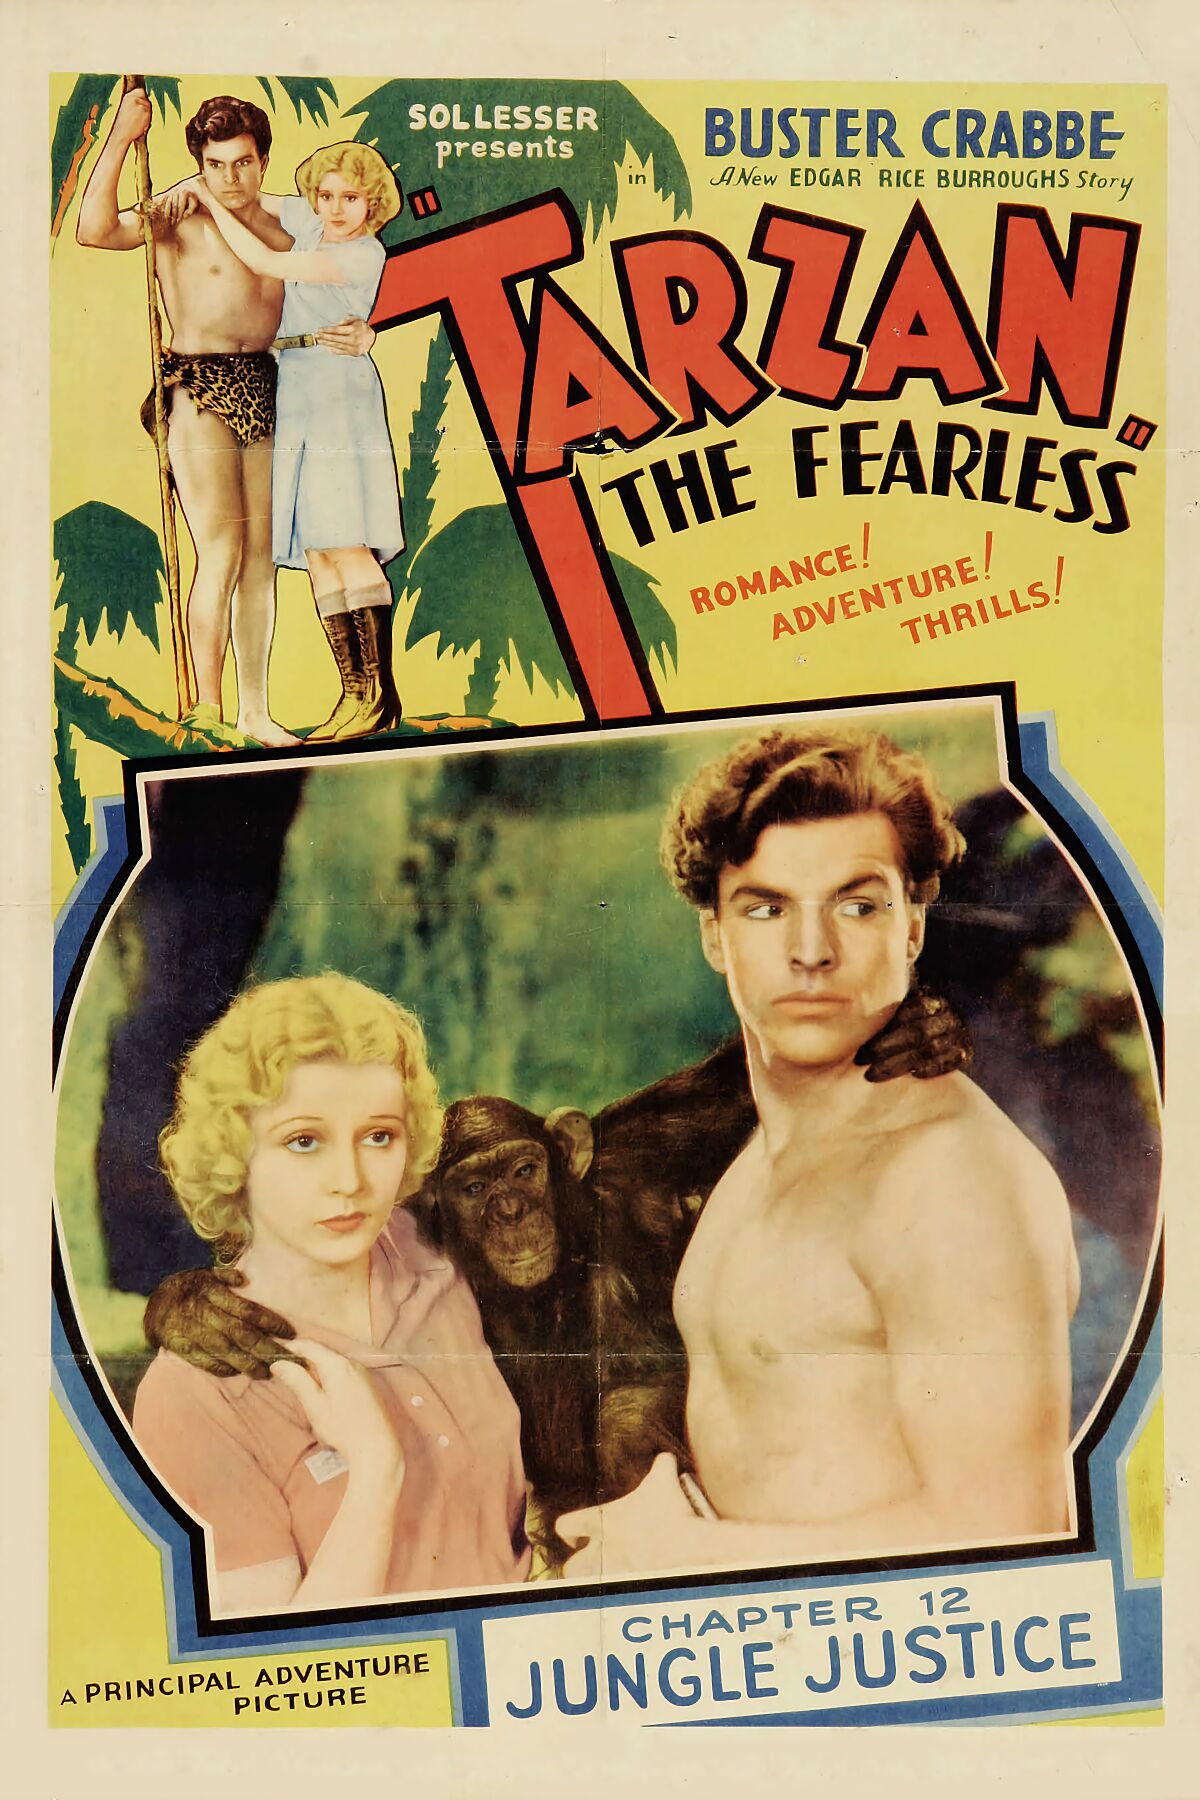 Film poster for episode 12 of the American film serial Tarzan the Fearless Date circa 1933